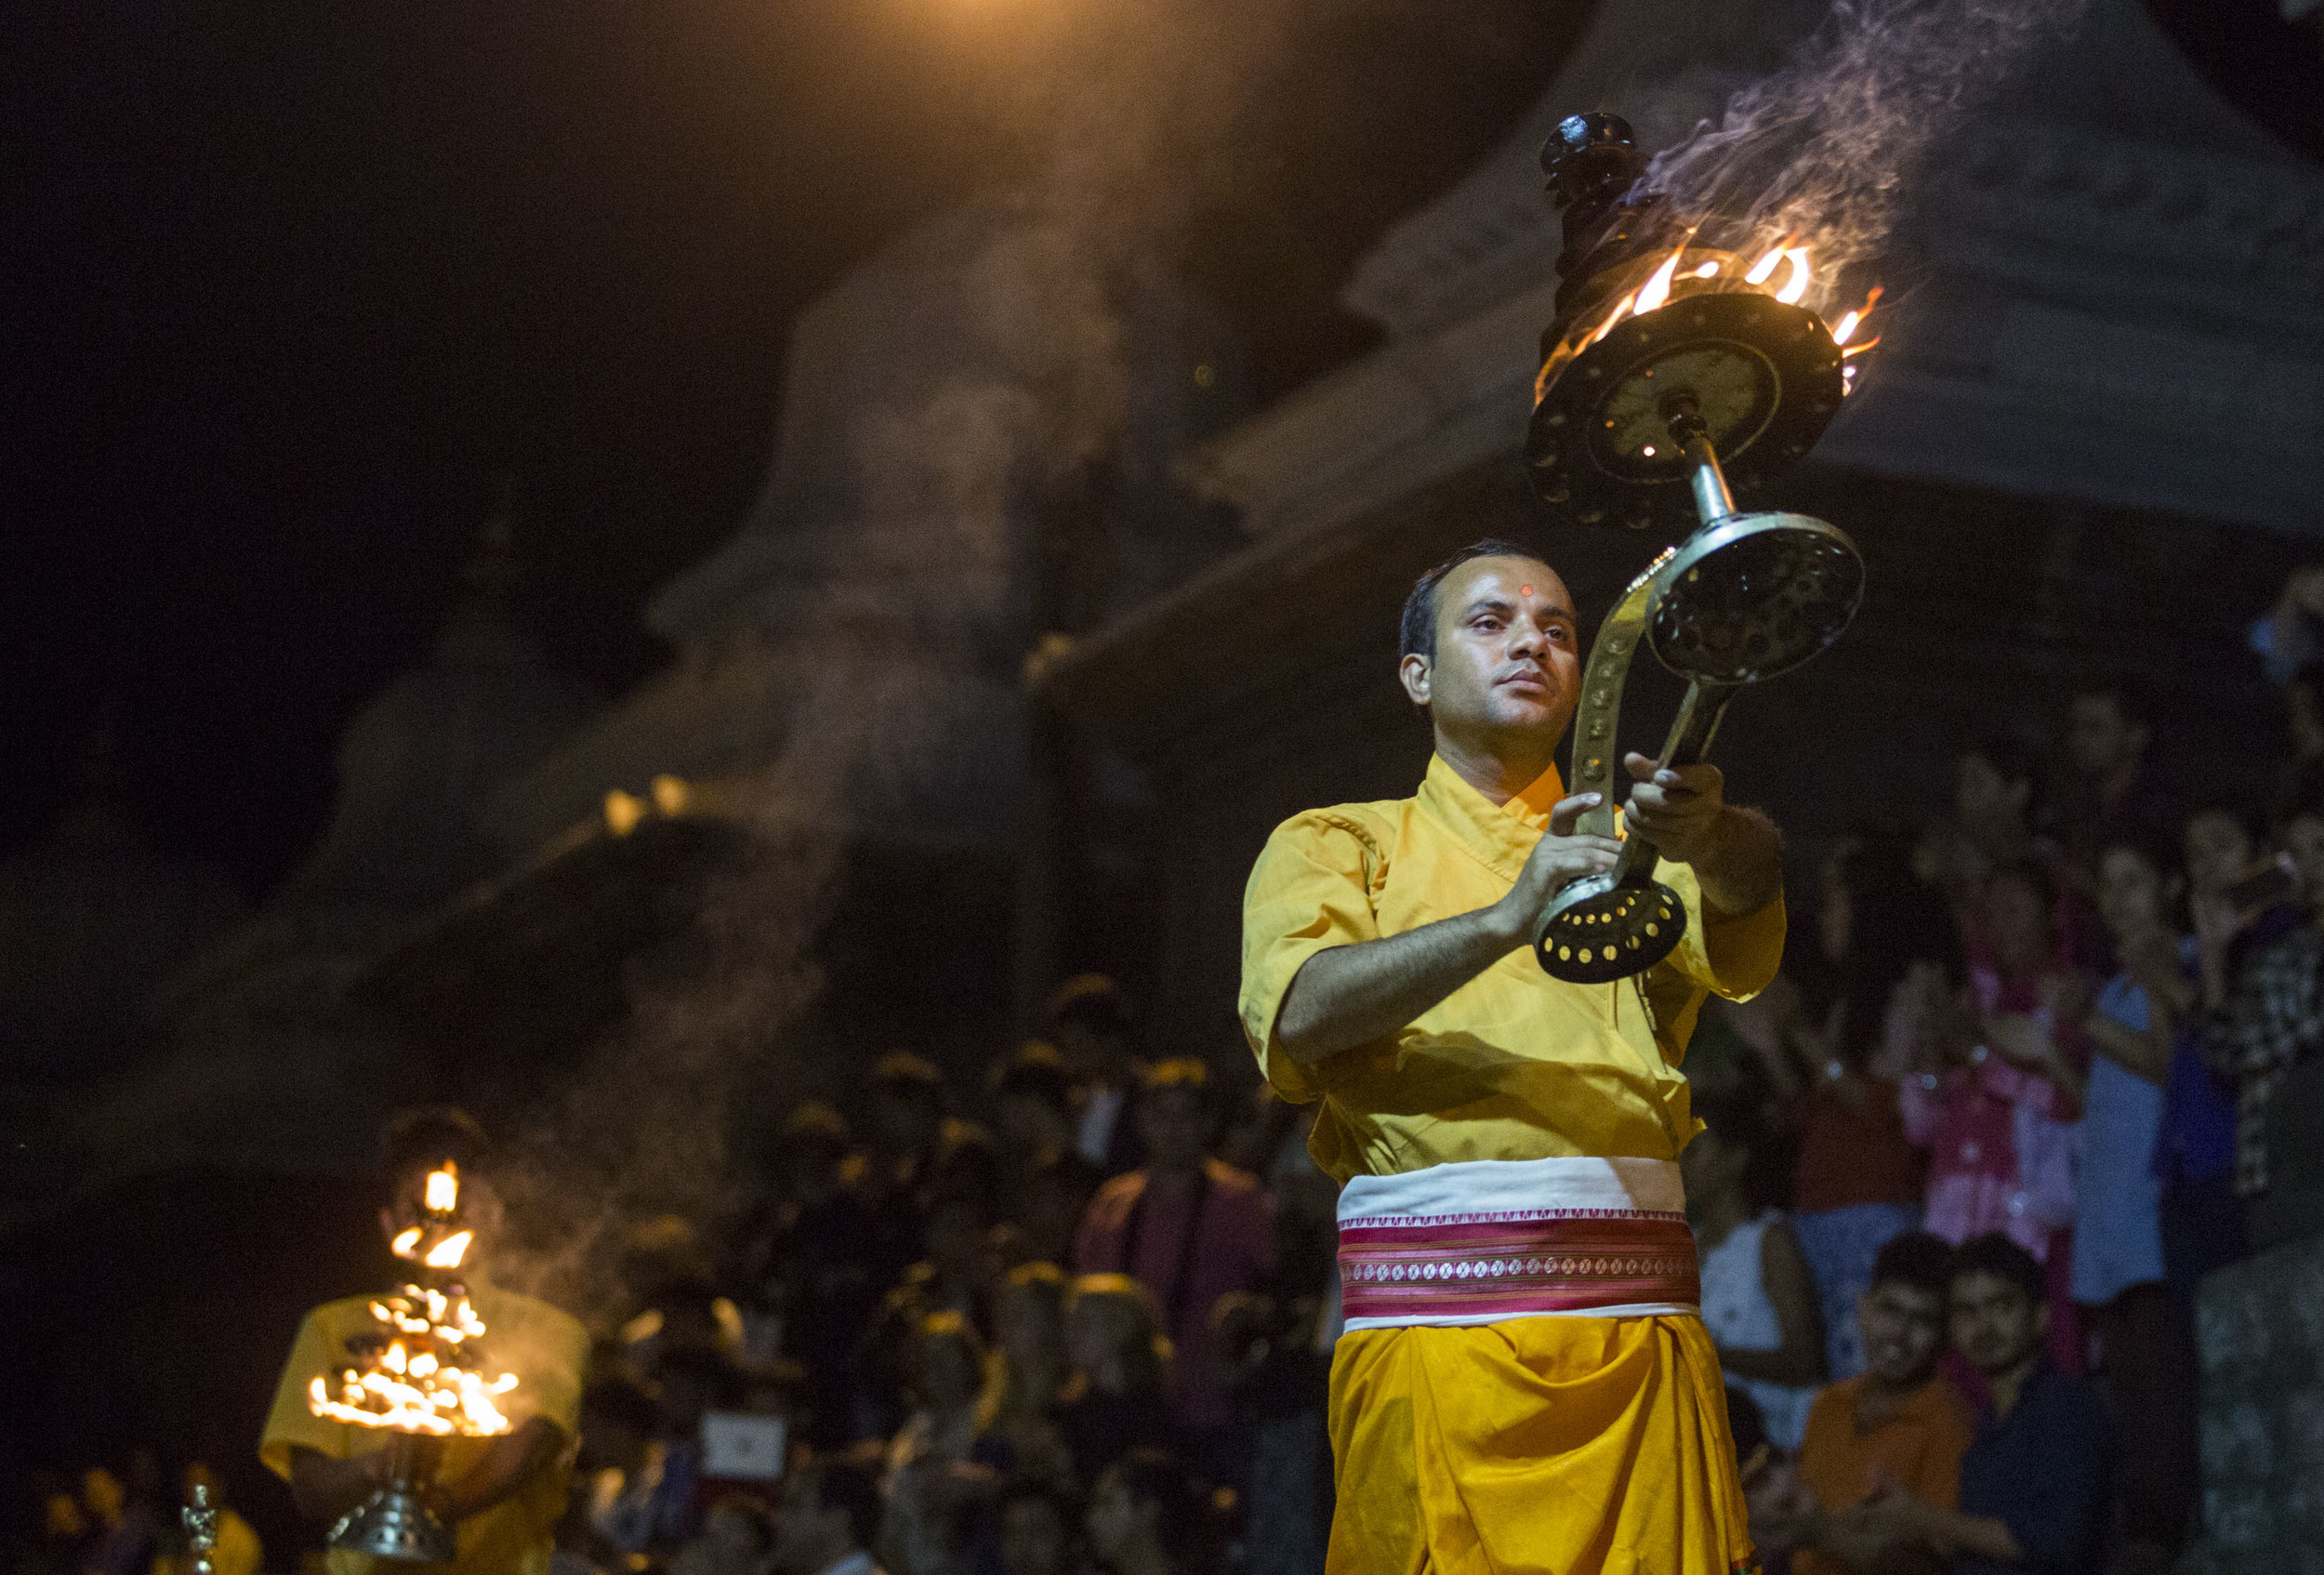  Hindu priests hold their nightly worship ceremony at Pashupati. Pashupati is home to the oldest temple in Nepal and is considered one of the most sacred places in Hinduism. 